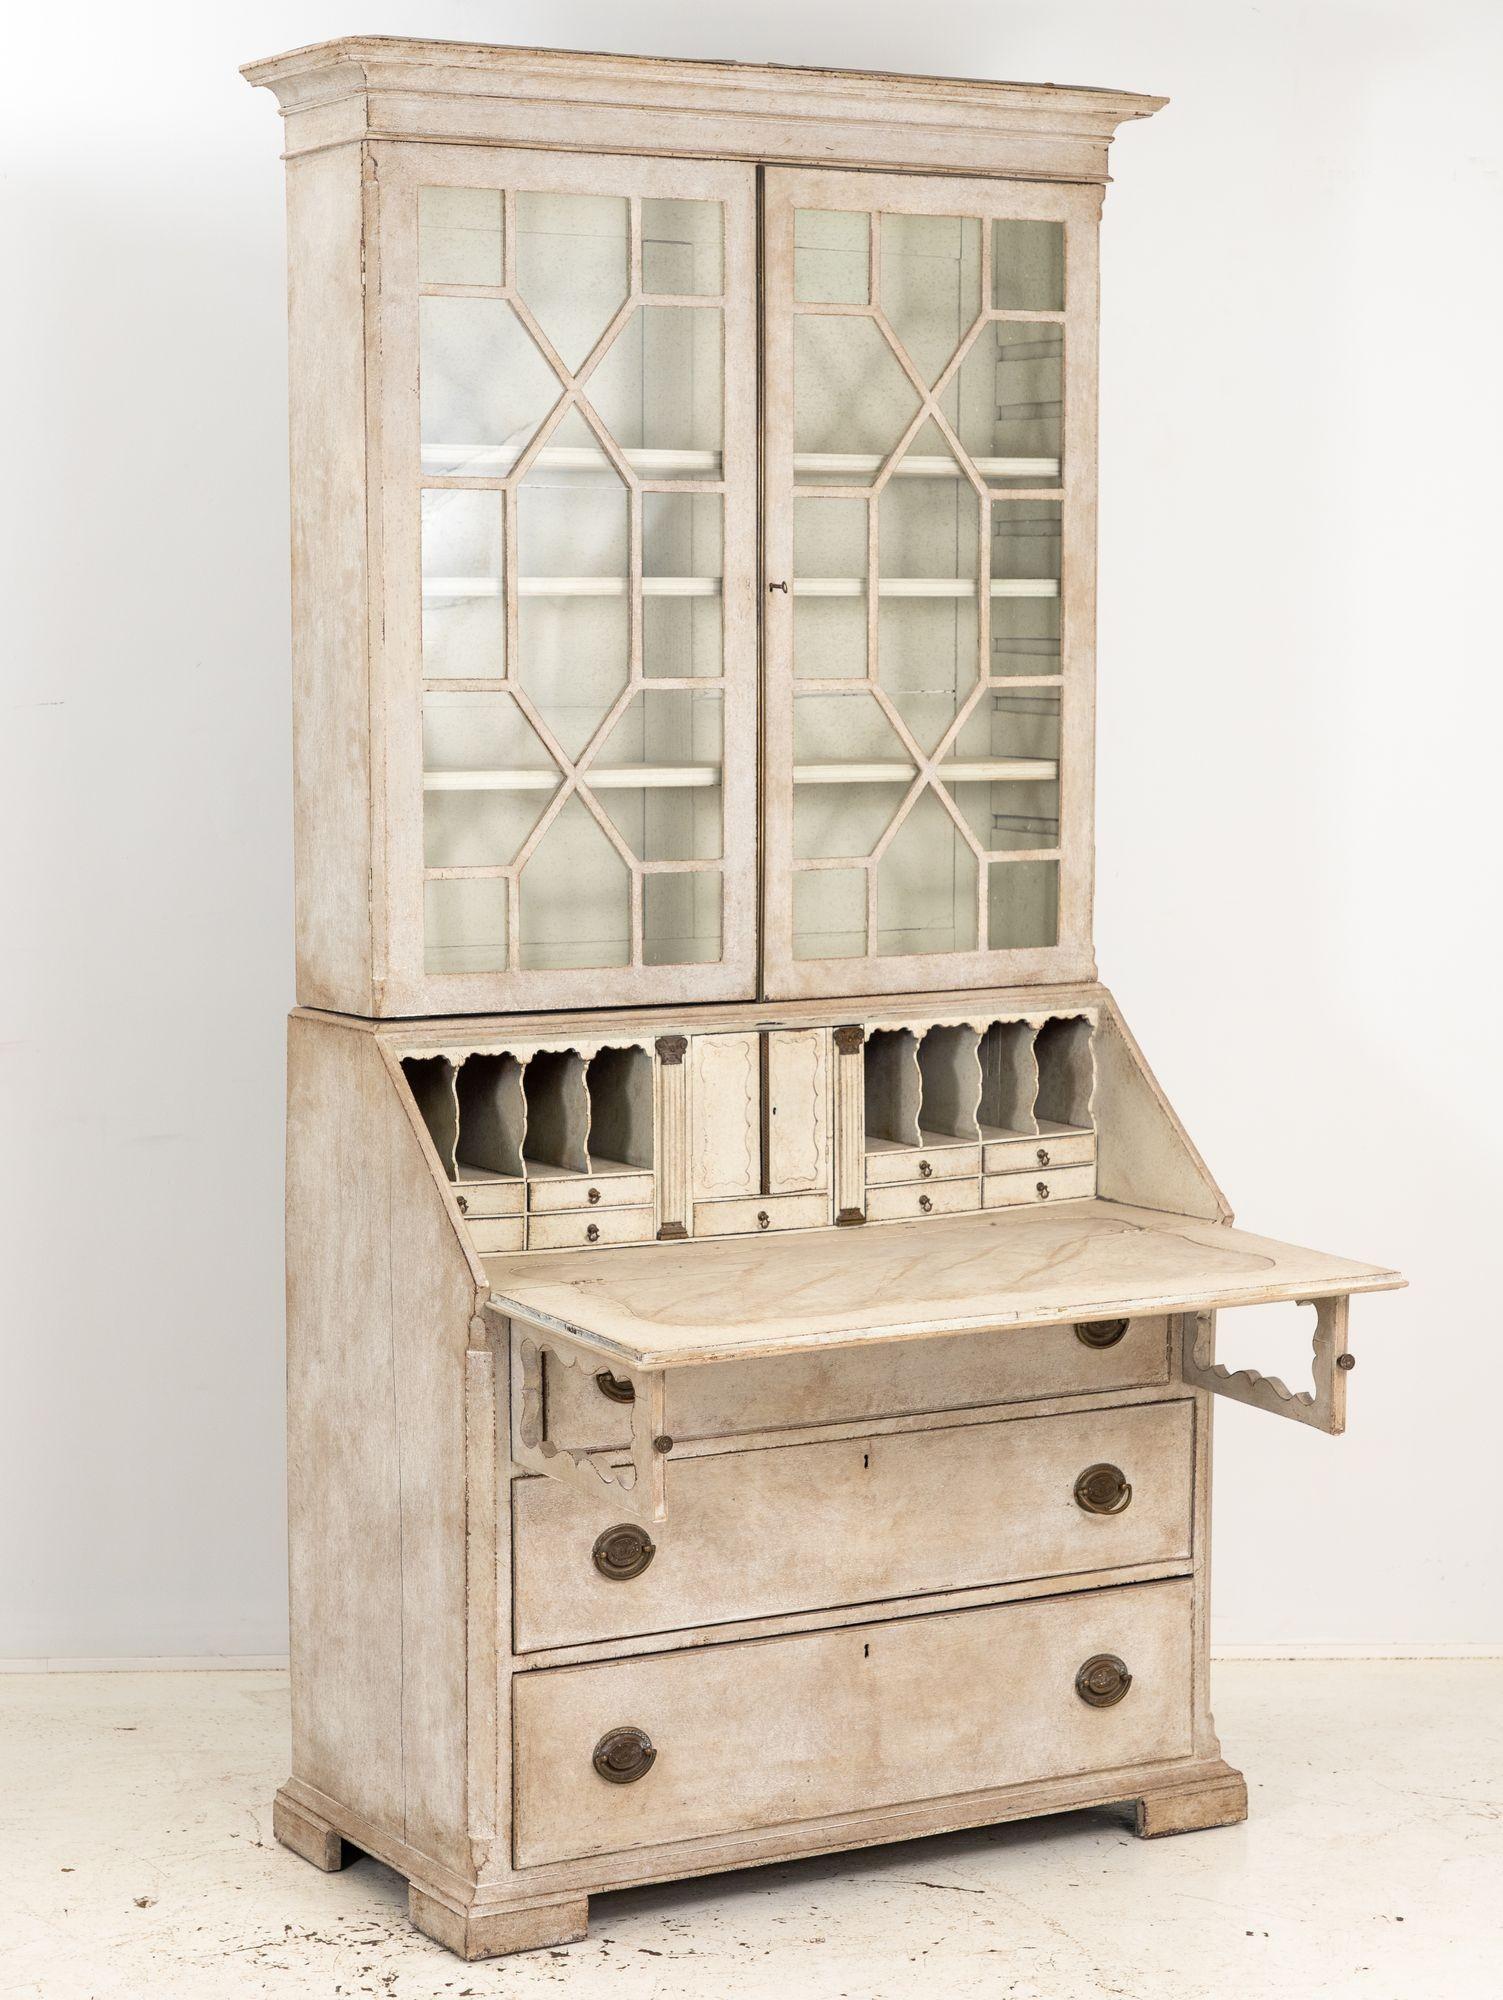 This late 19th-century Gustavian style drop-front secretary bookshelf is a true embodiment of timeless sophistication. Adorned with a later gray paint that enhances its antique allure, it retains its original glass with delicate grid-patterned